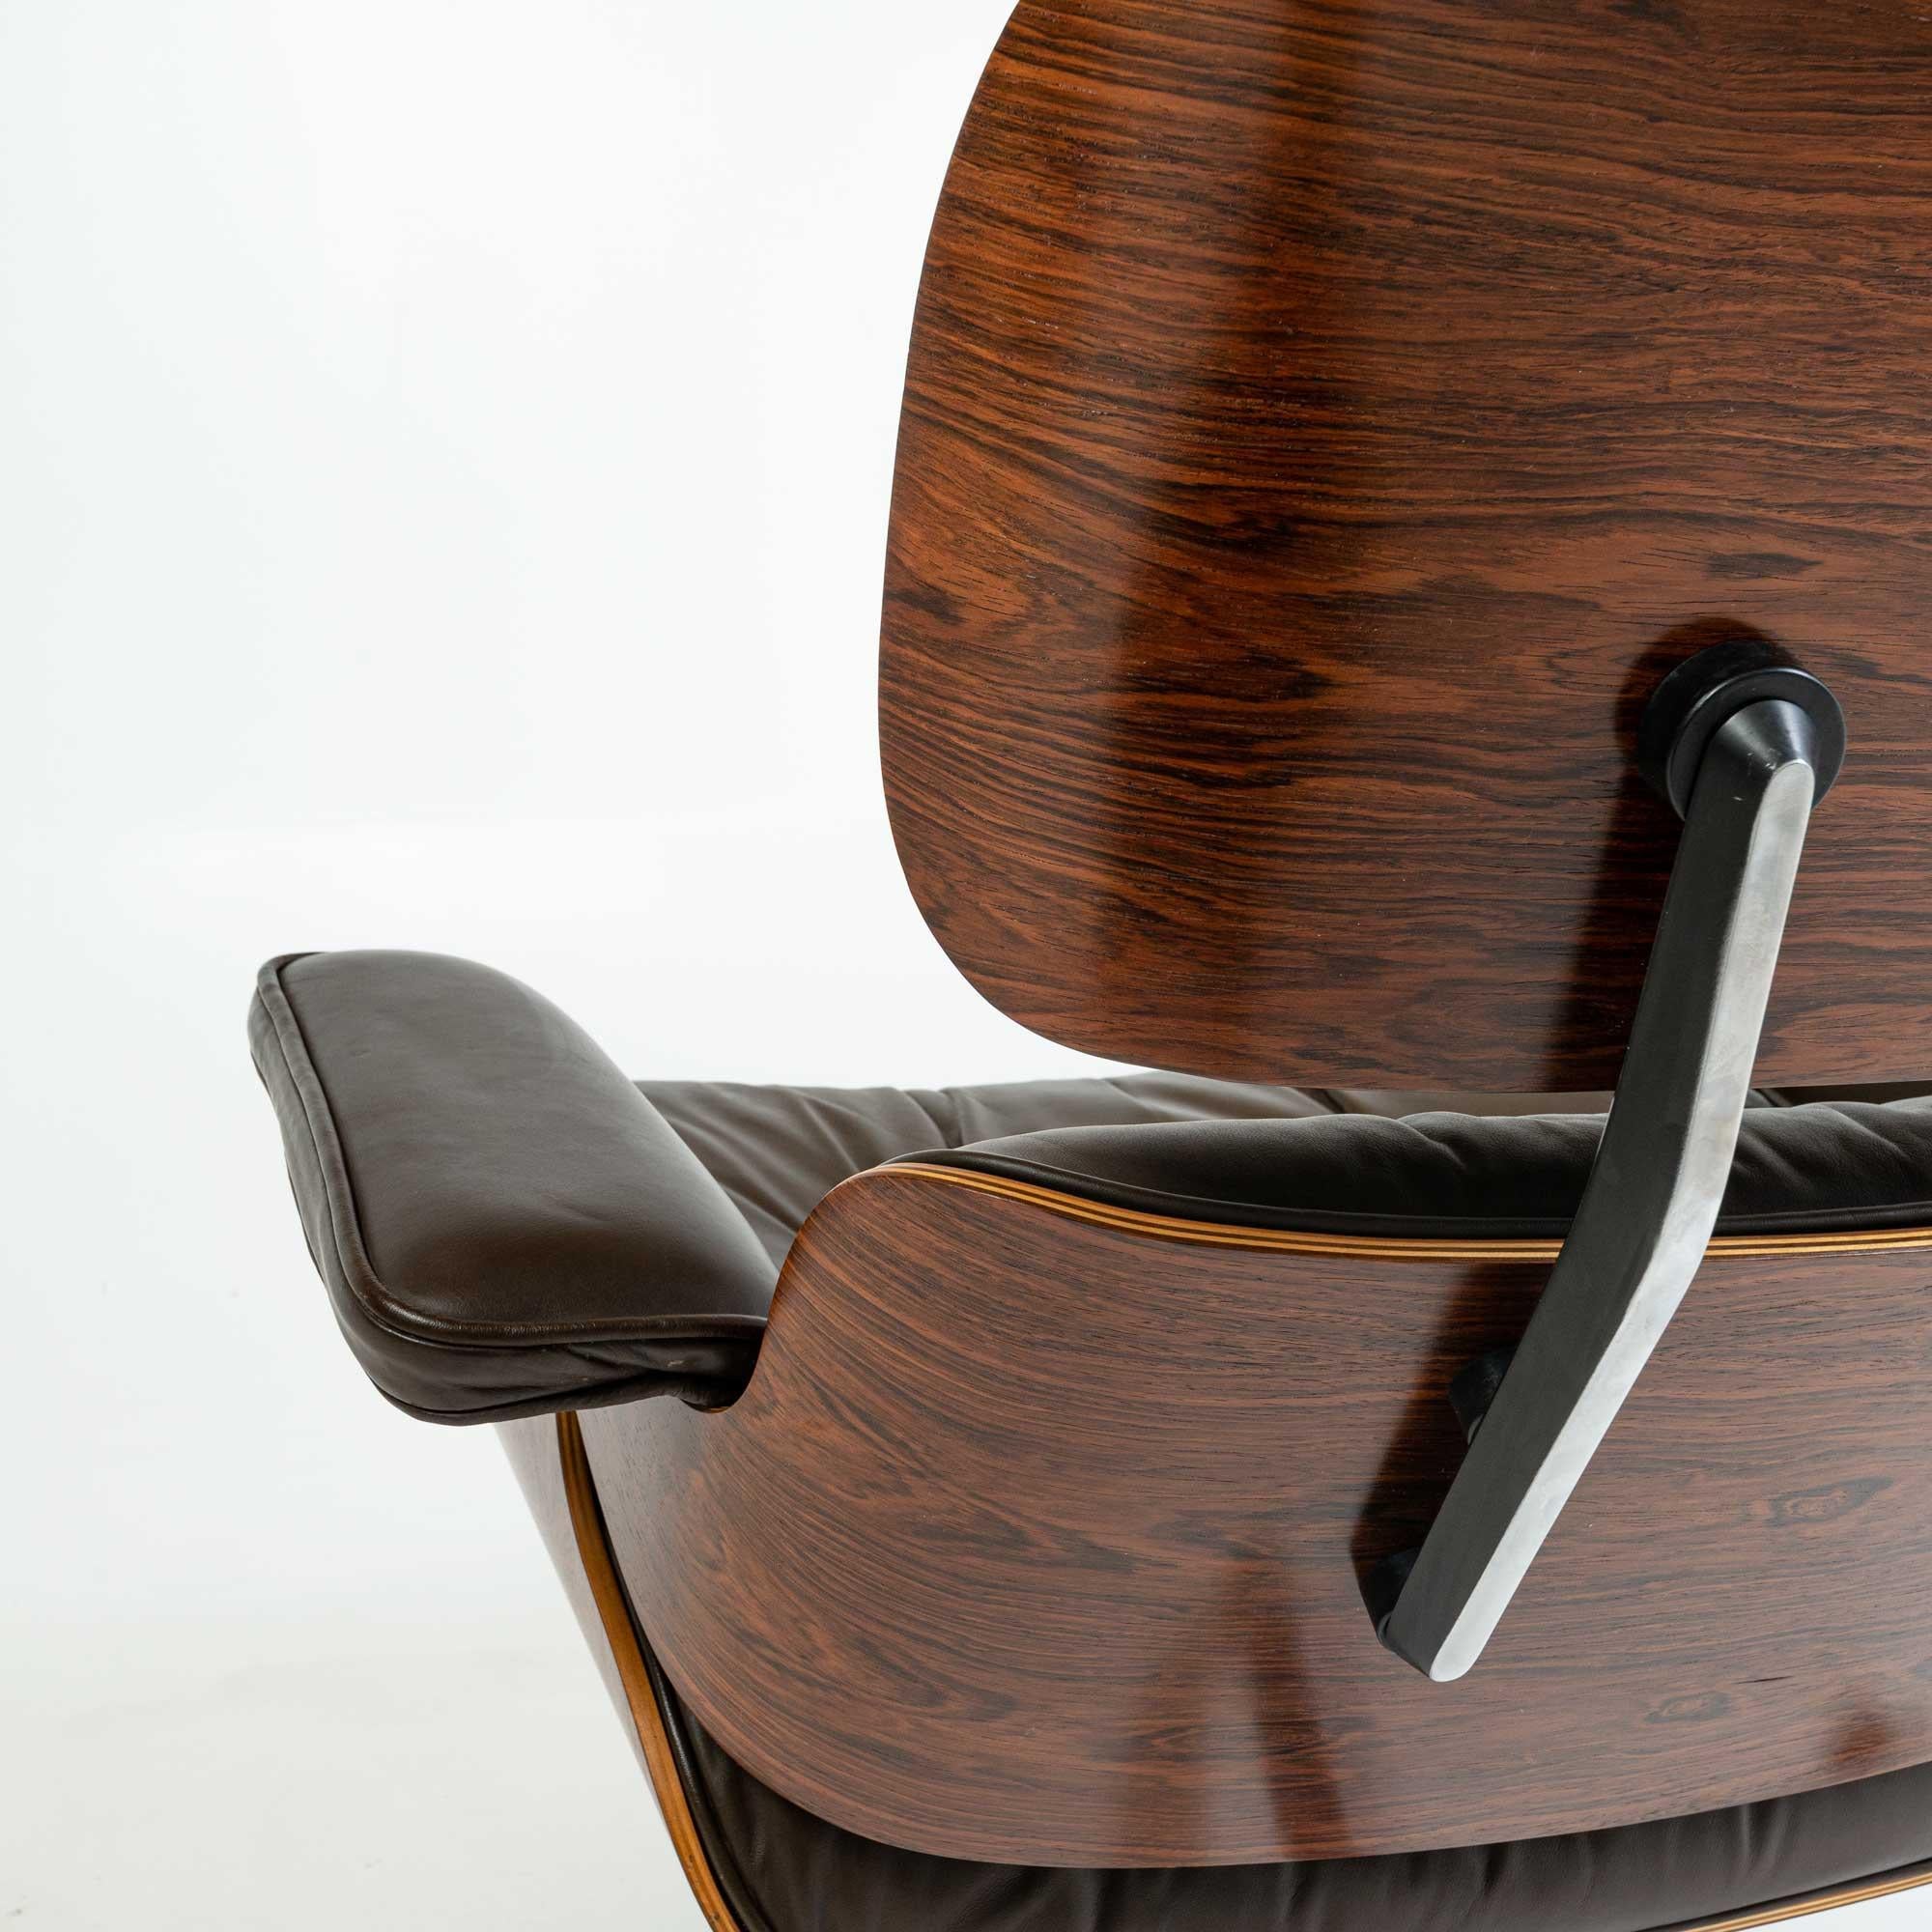 Late 20th Century 3rd Gen Eames Lounge Chair 670-671 in Original Chocolate Leather For Sale